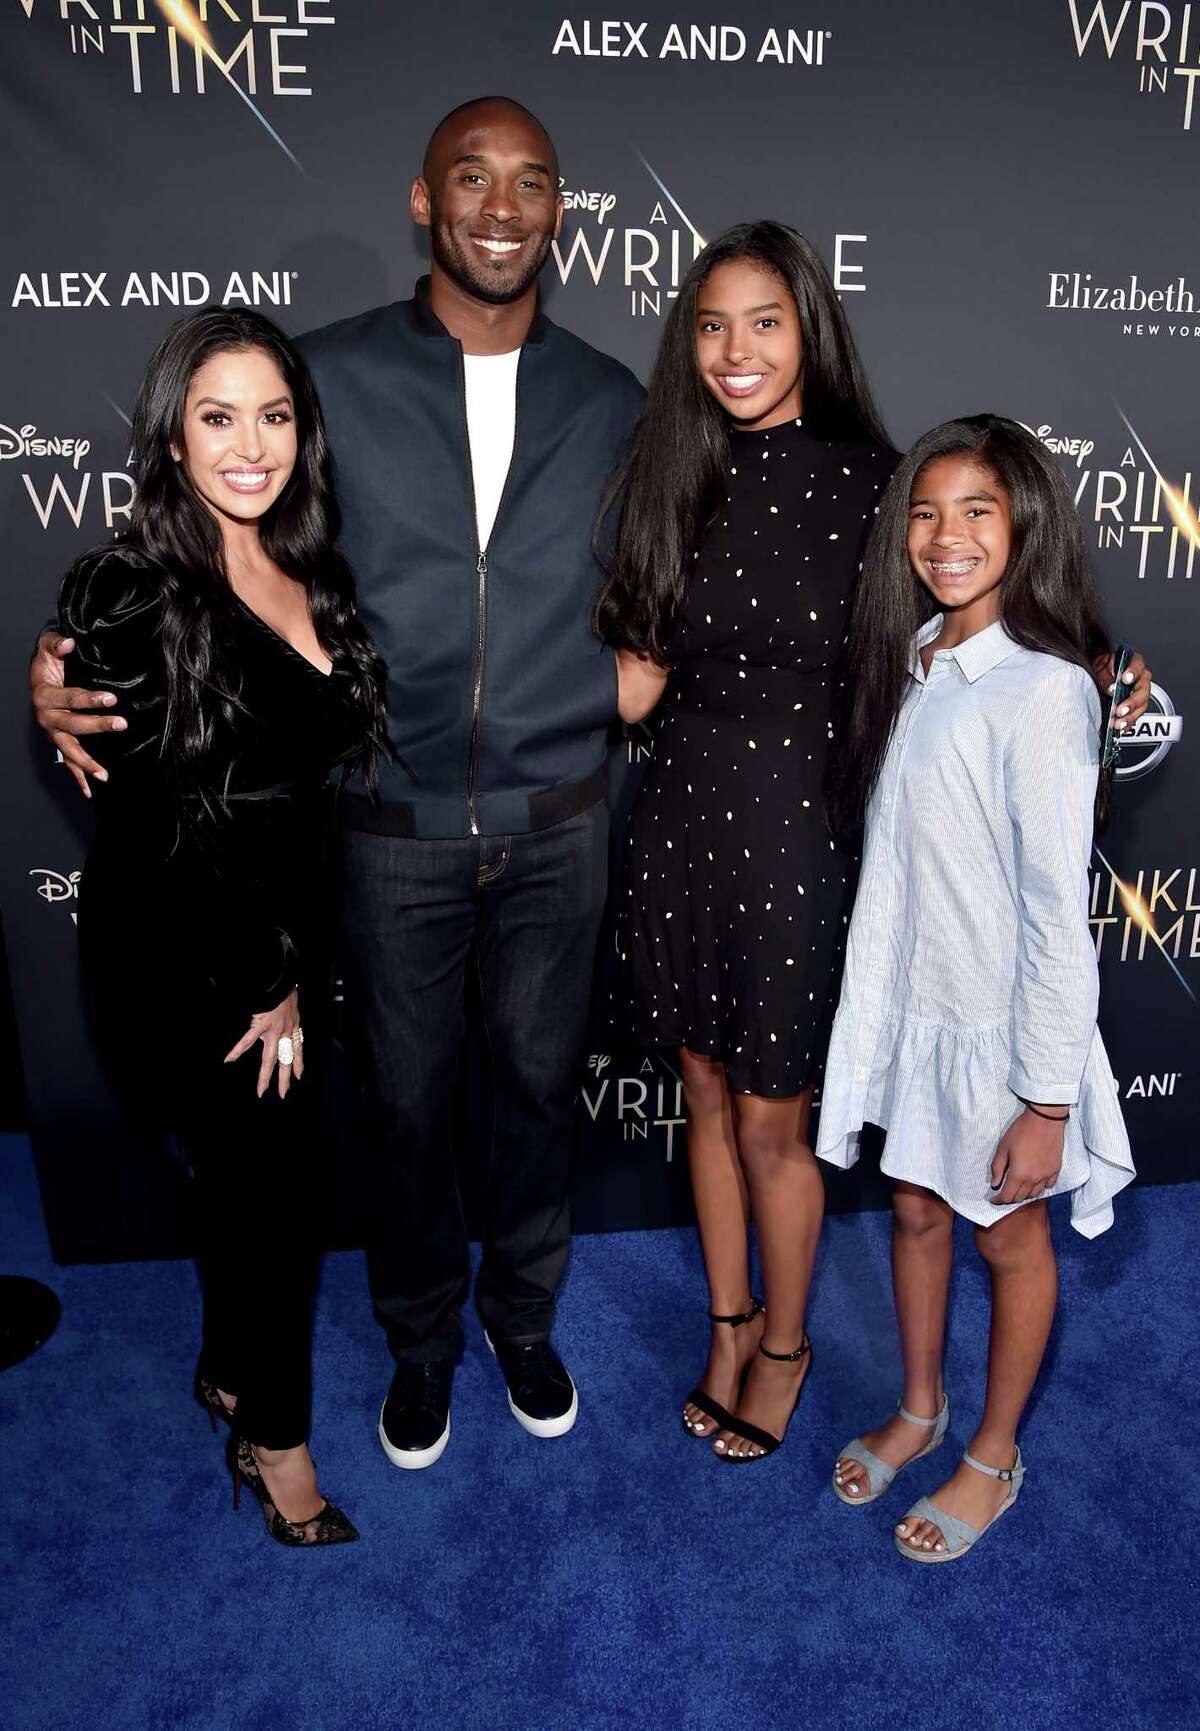 LOS ANGELES, CA - FEBRUARY 26: (L-R) Vanessa Laine Bryant, former NBA player Kobe Bryant, Natalia Diamante Bryant, and Gianna Maria-Onore Bryant arrive at the world premiere of Disney?s 'A Wrinkle in Time' at the El Capitan Theatre in Hollywood CA, March 26, 2018.